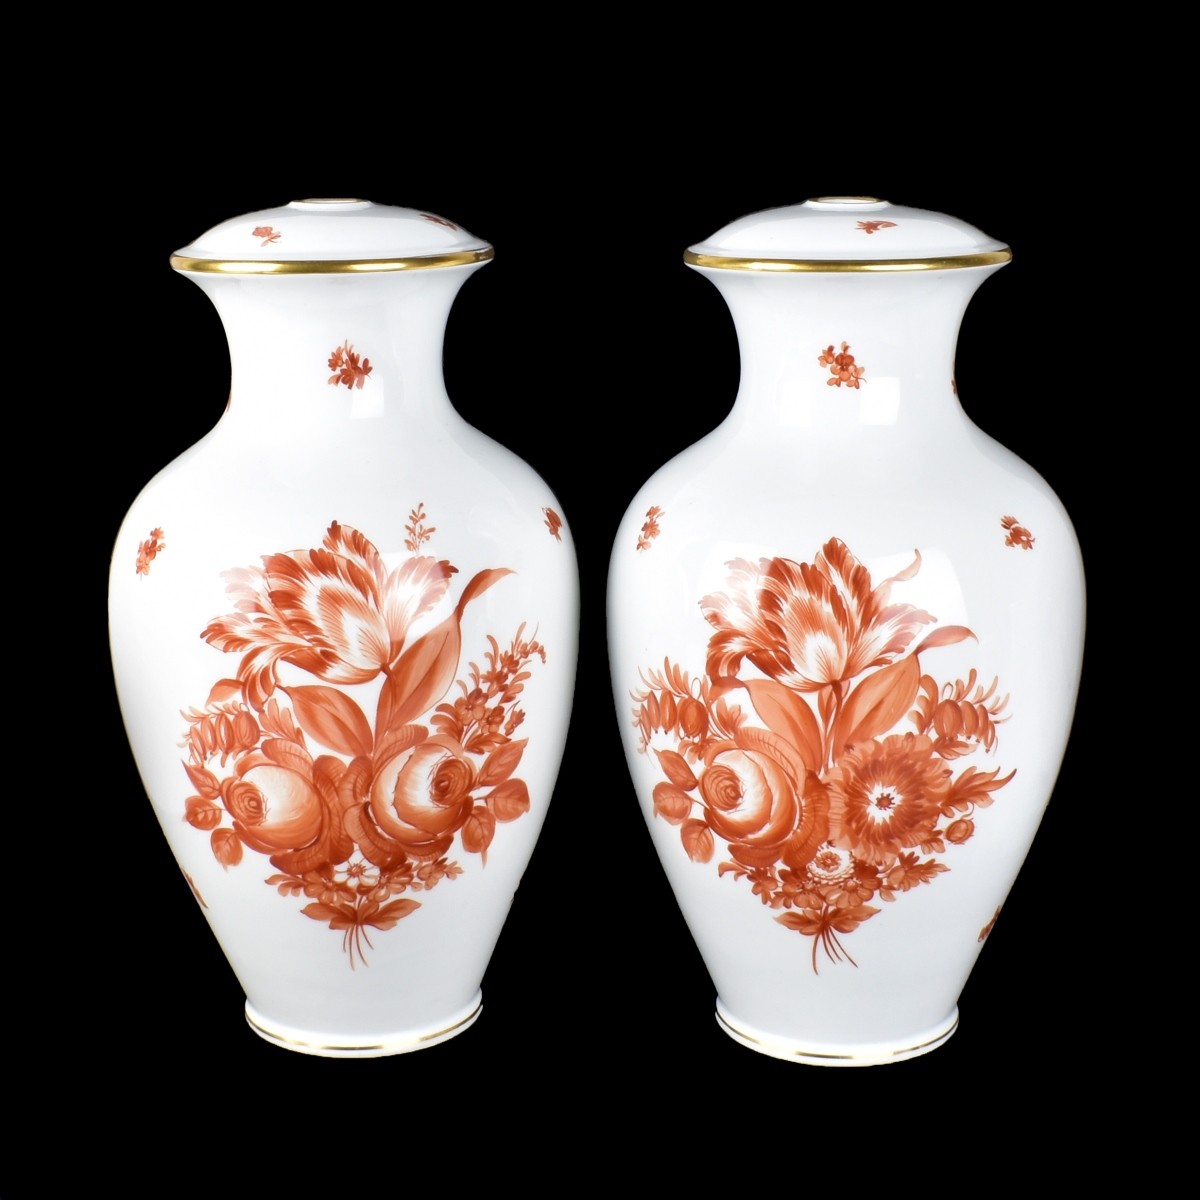 Pair of Herend Vases Previously as Lamps